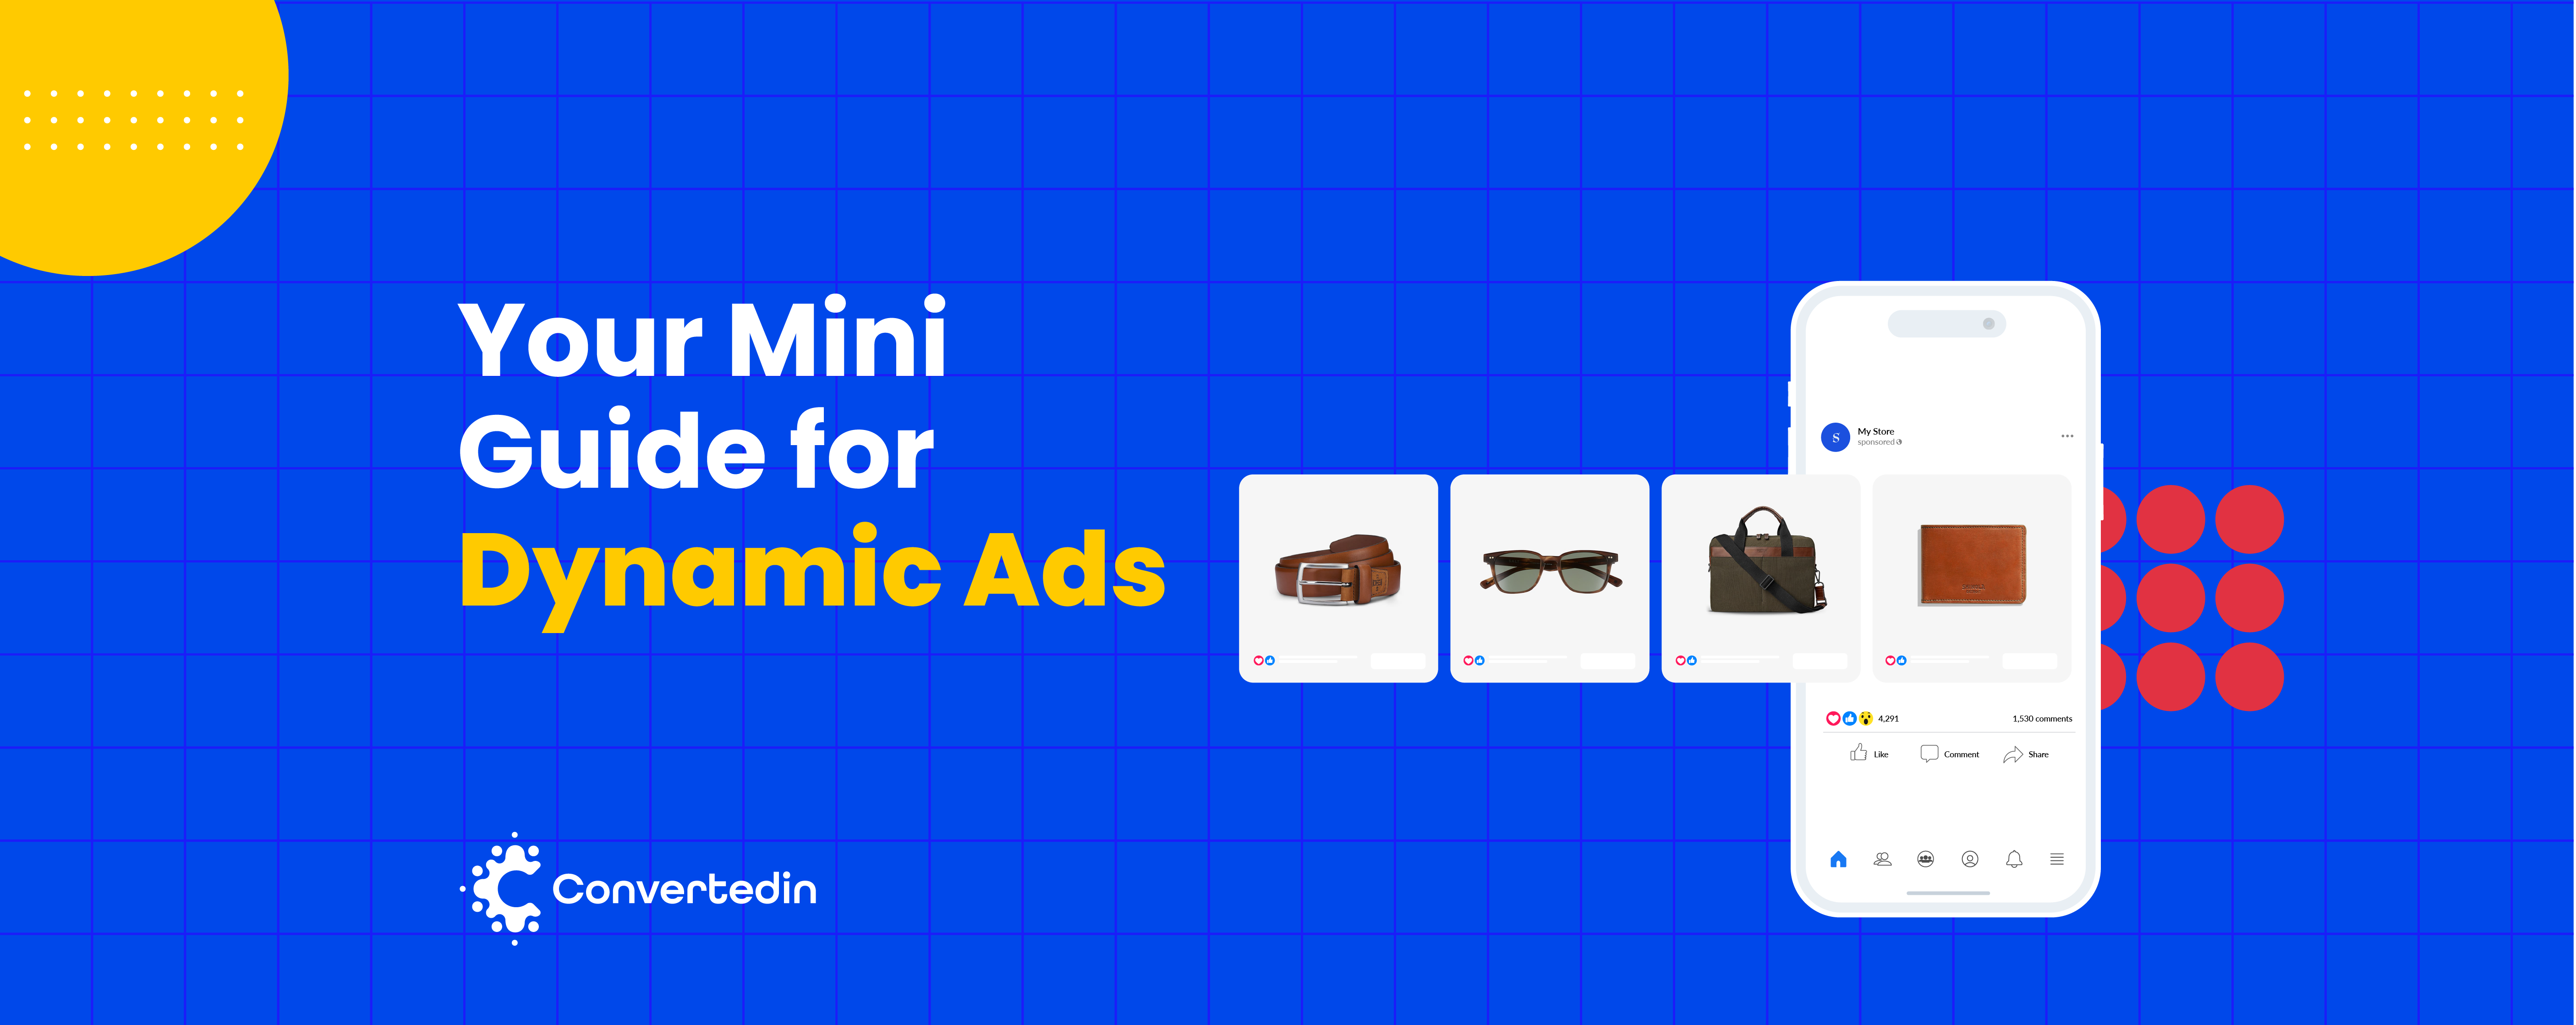 Your Mini Guide for Dynamic Ads